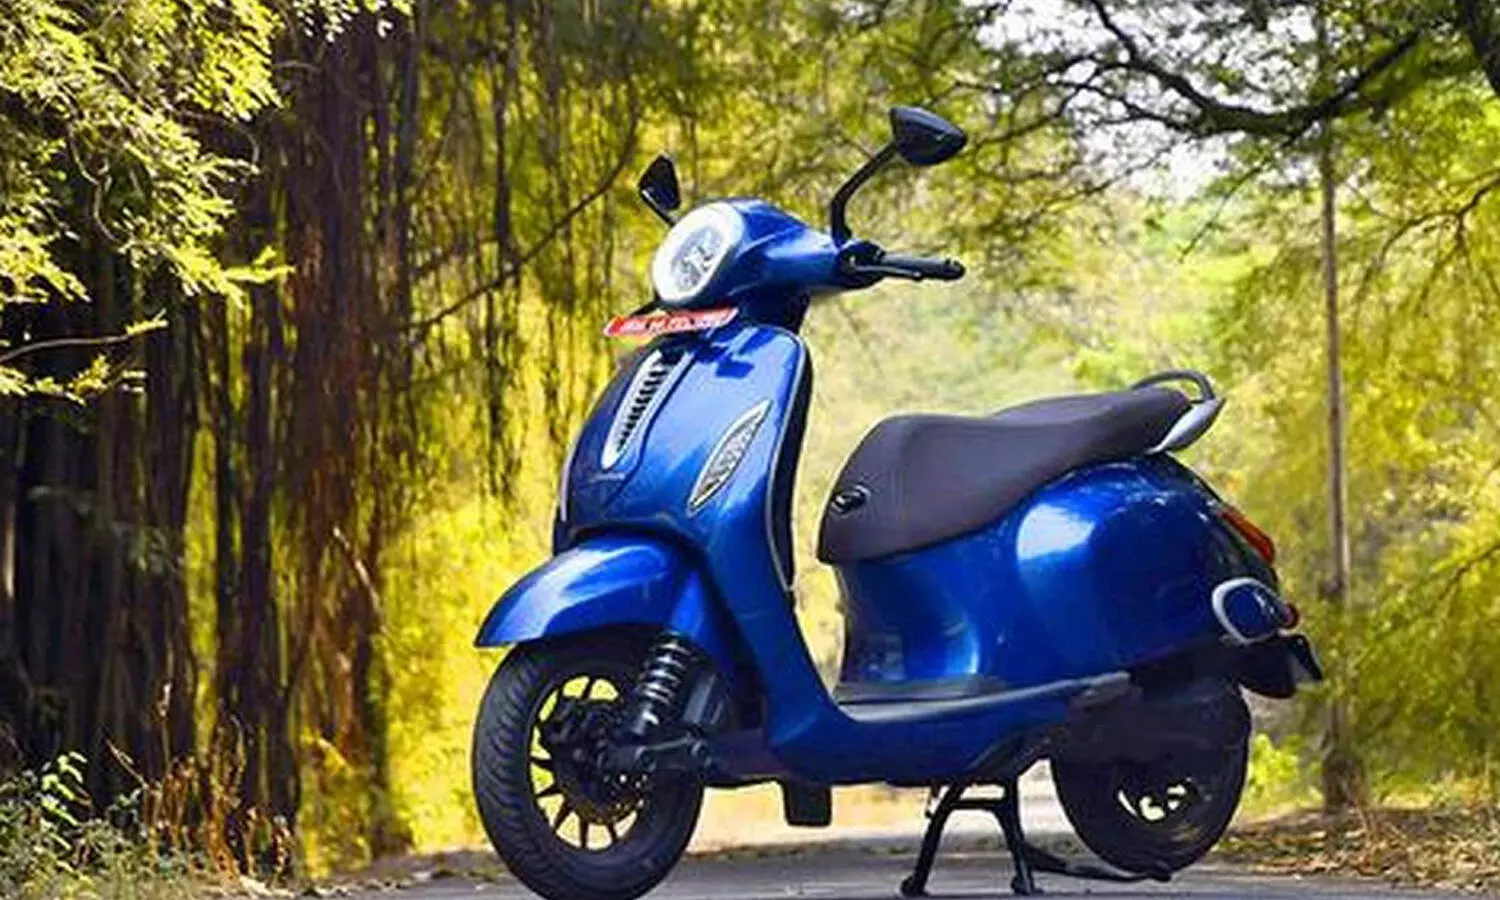 Bajaj is All Set to Enter the EV Segment with a Huge Investment Plan